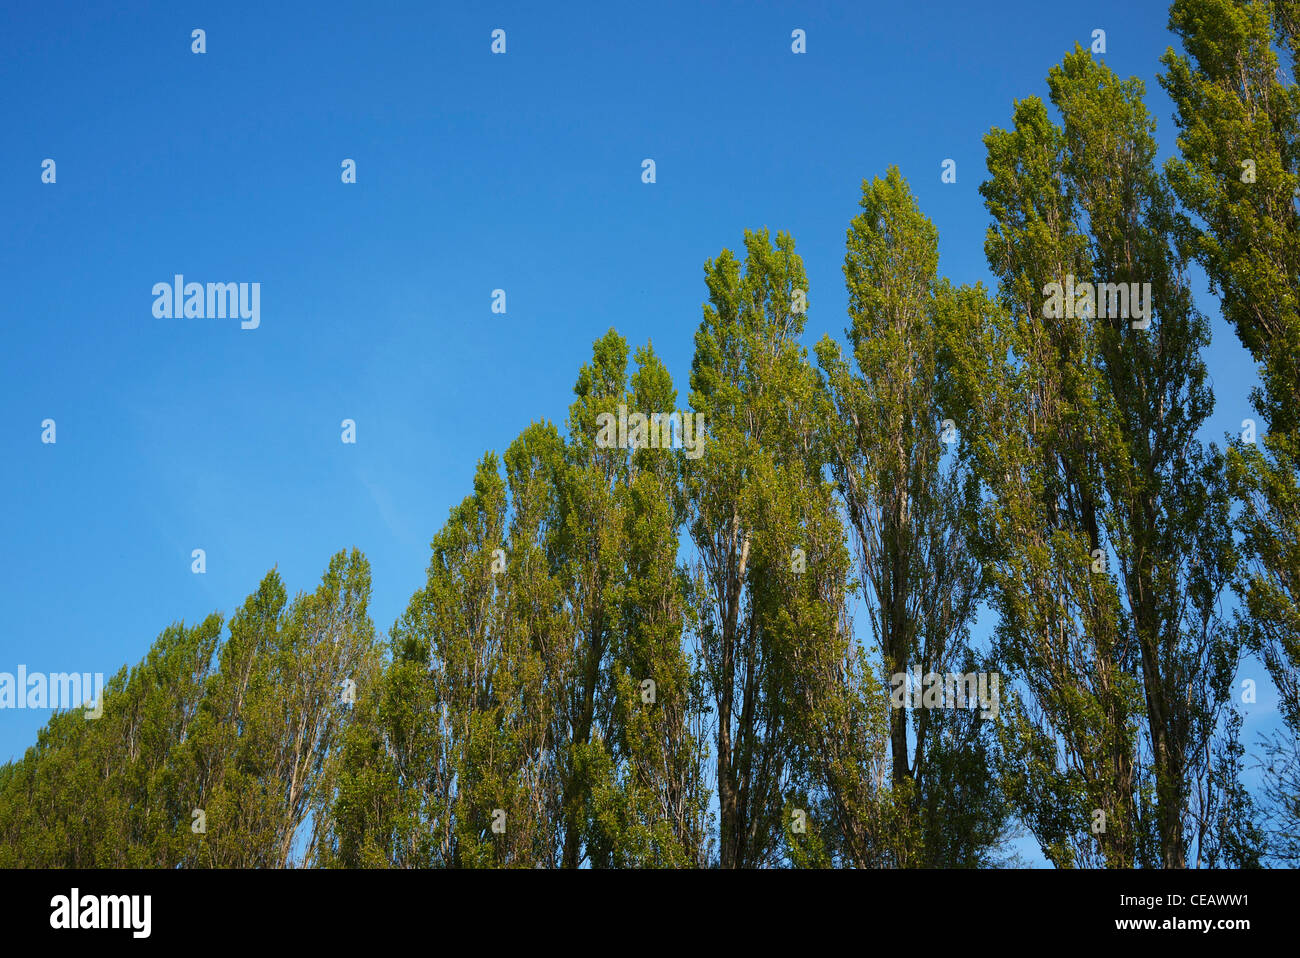 Poplar or Aspen trees in a line against a blue sky. UK. Stock Photo